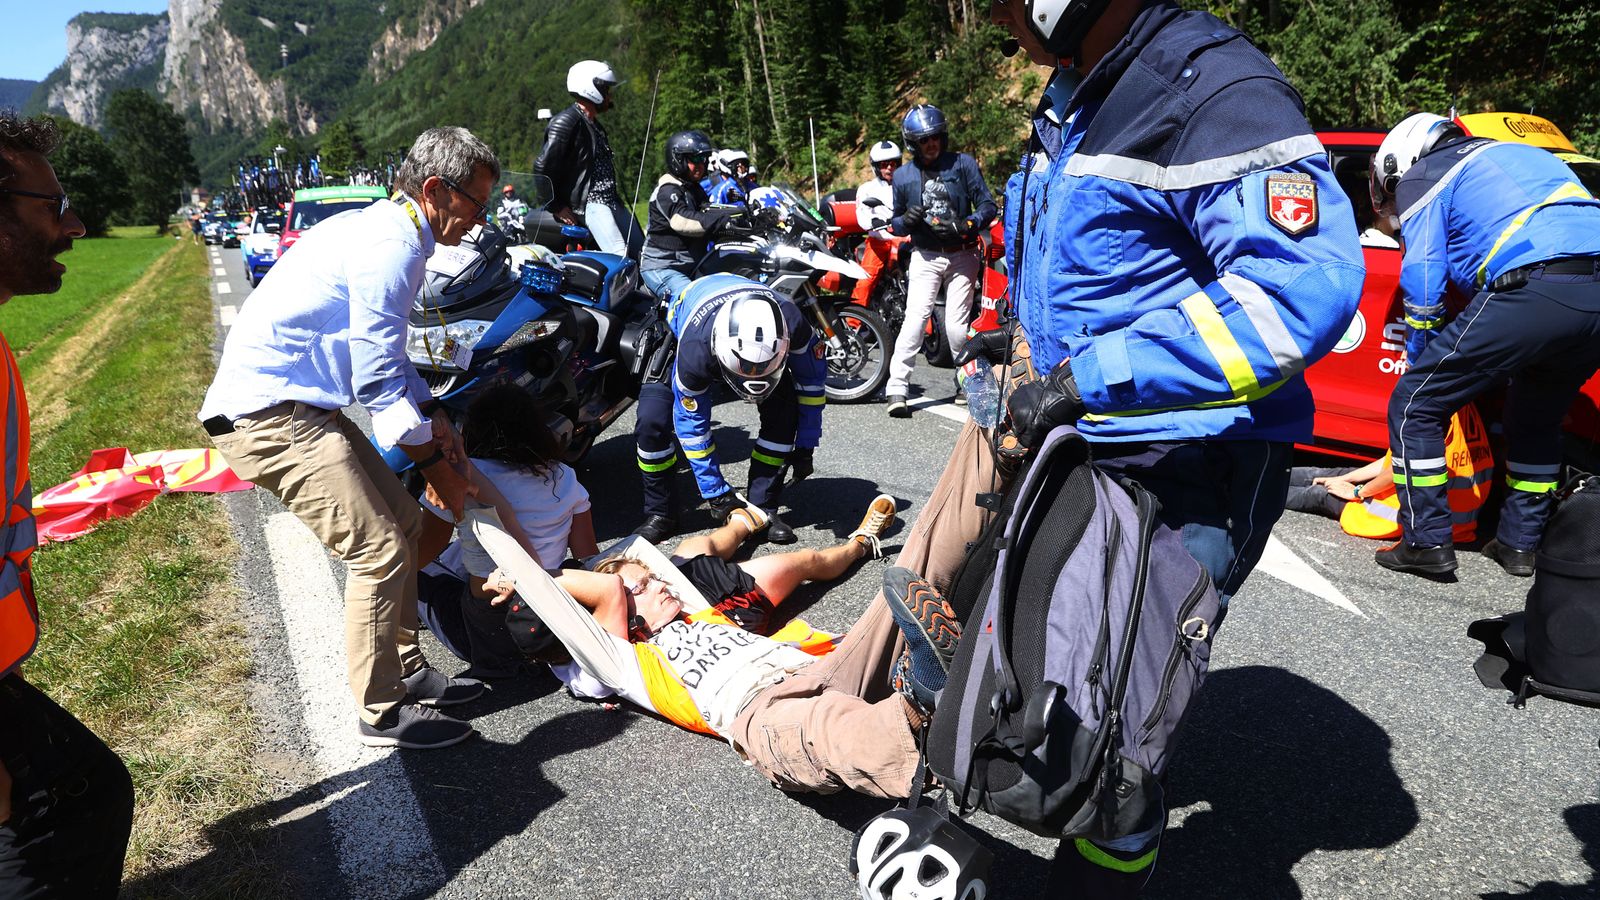 In pictures: Tour de France stage brought to standstill after protest